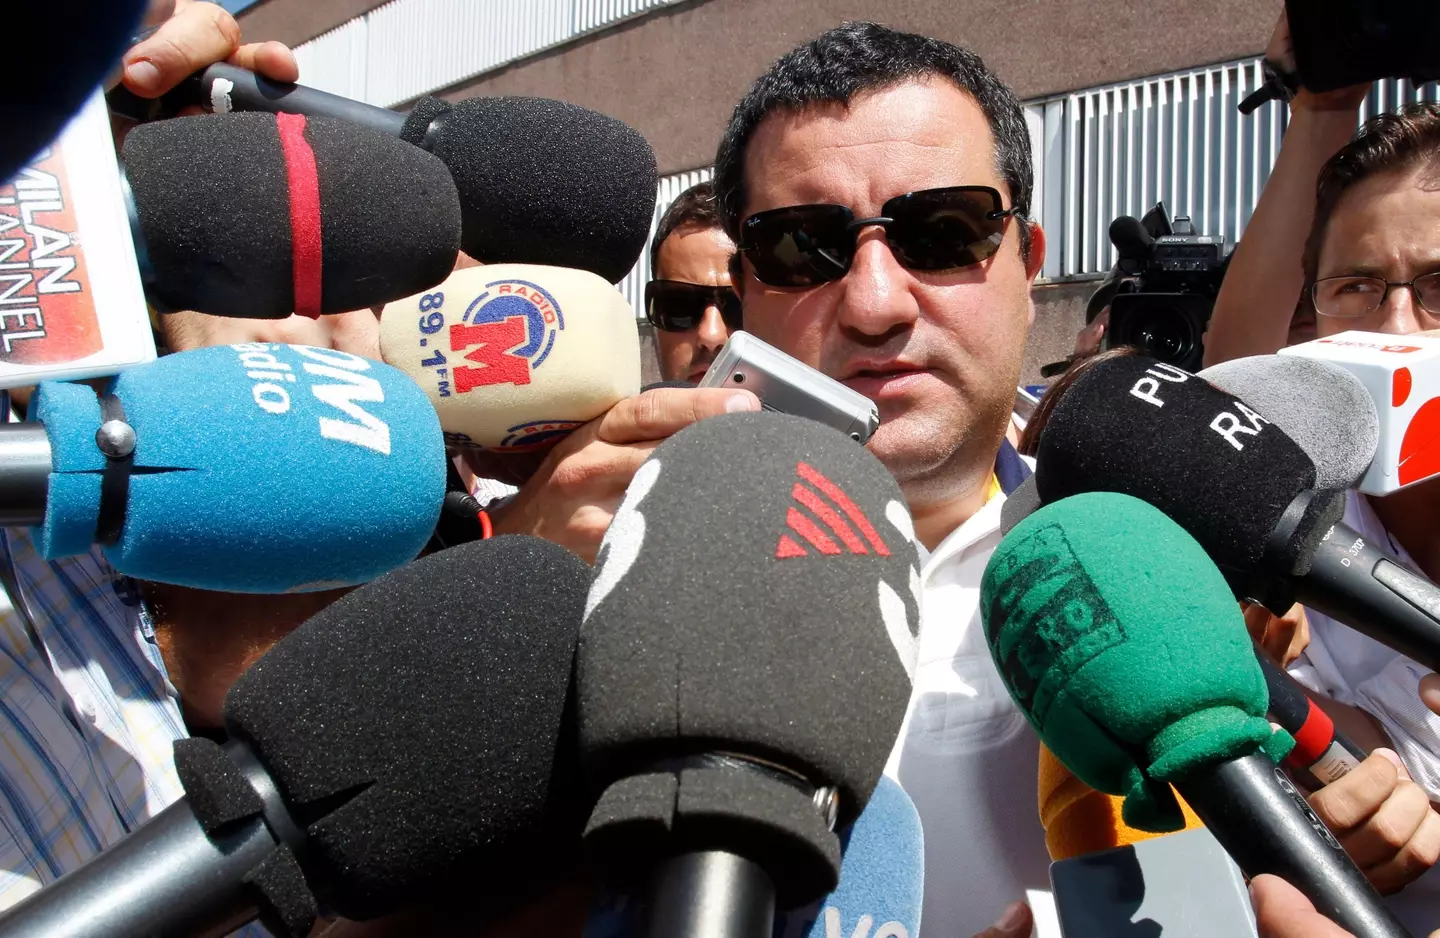 Raiola pictured at the offices of Barcelona in 2010. (Image